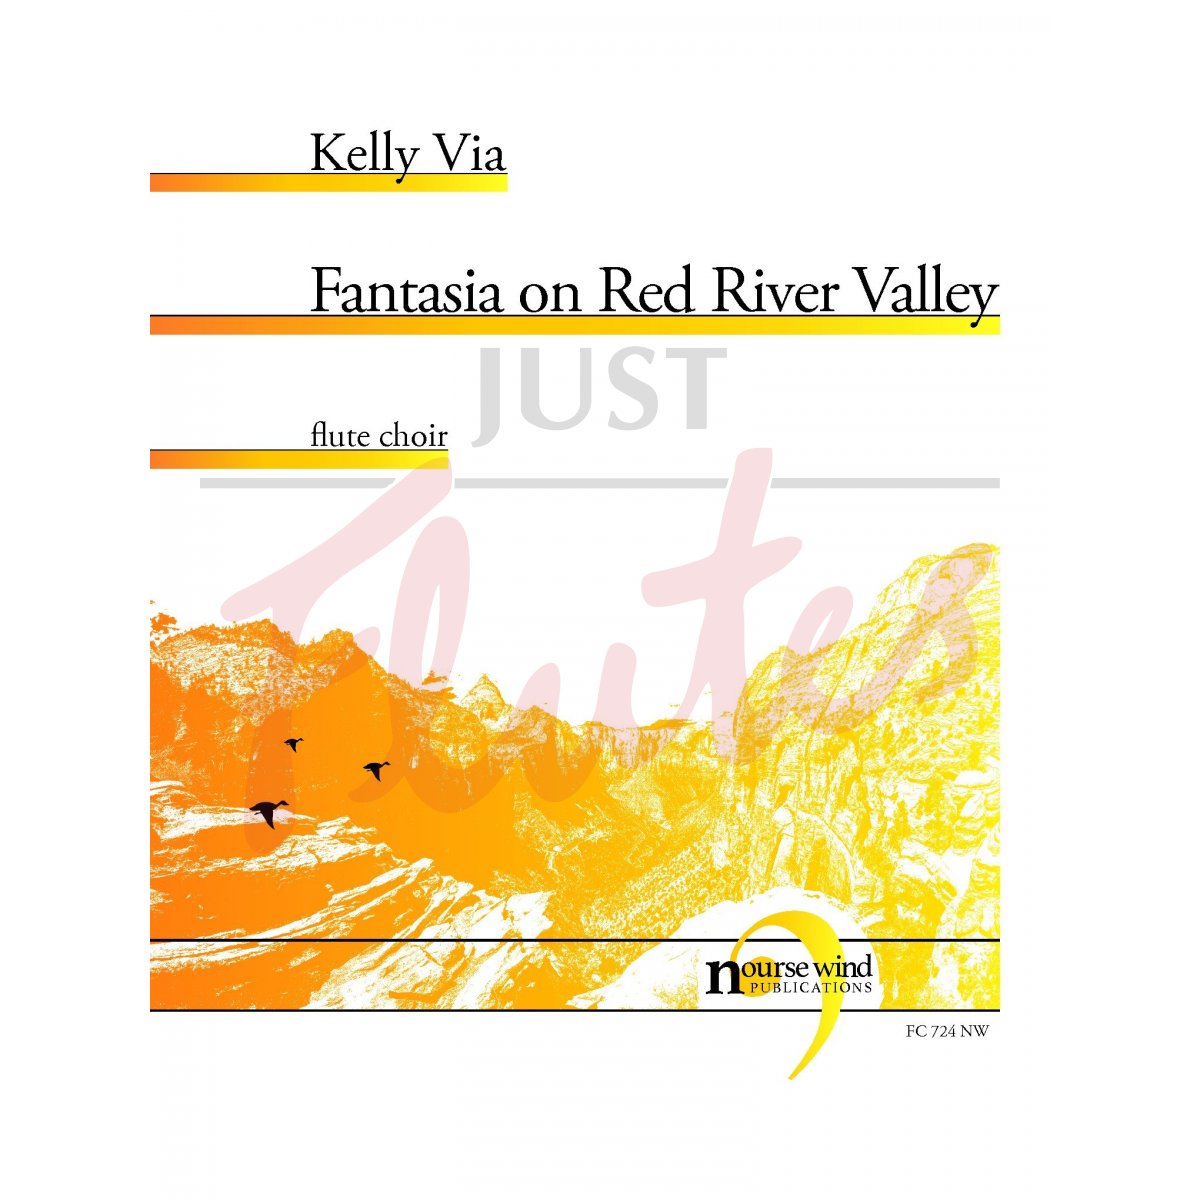 Fantasia on Red River Valley